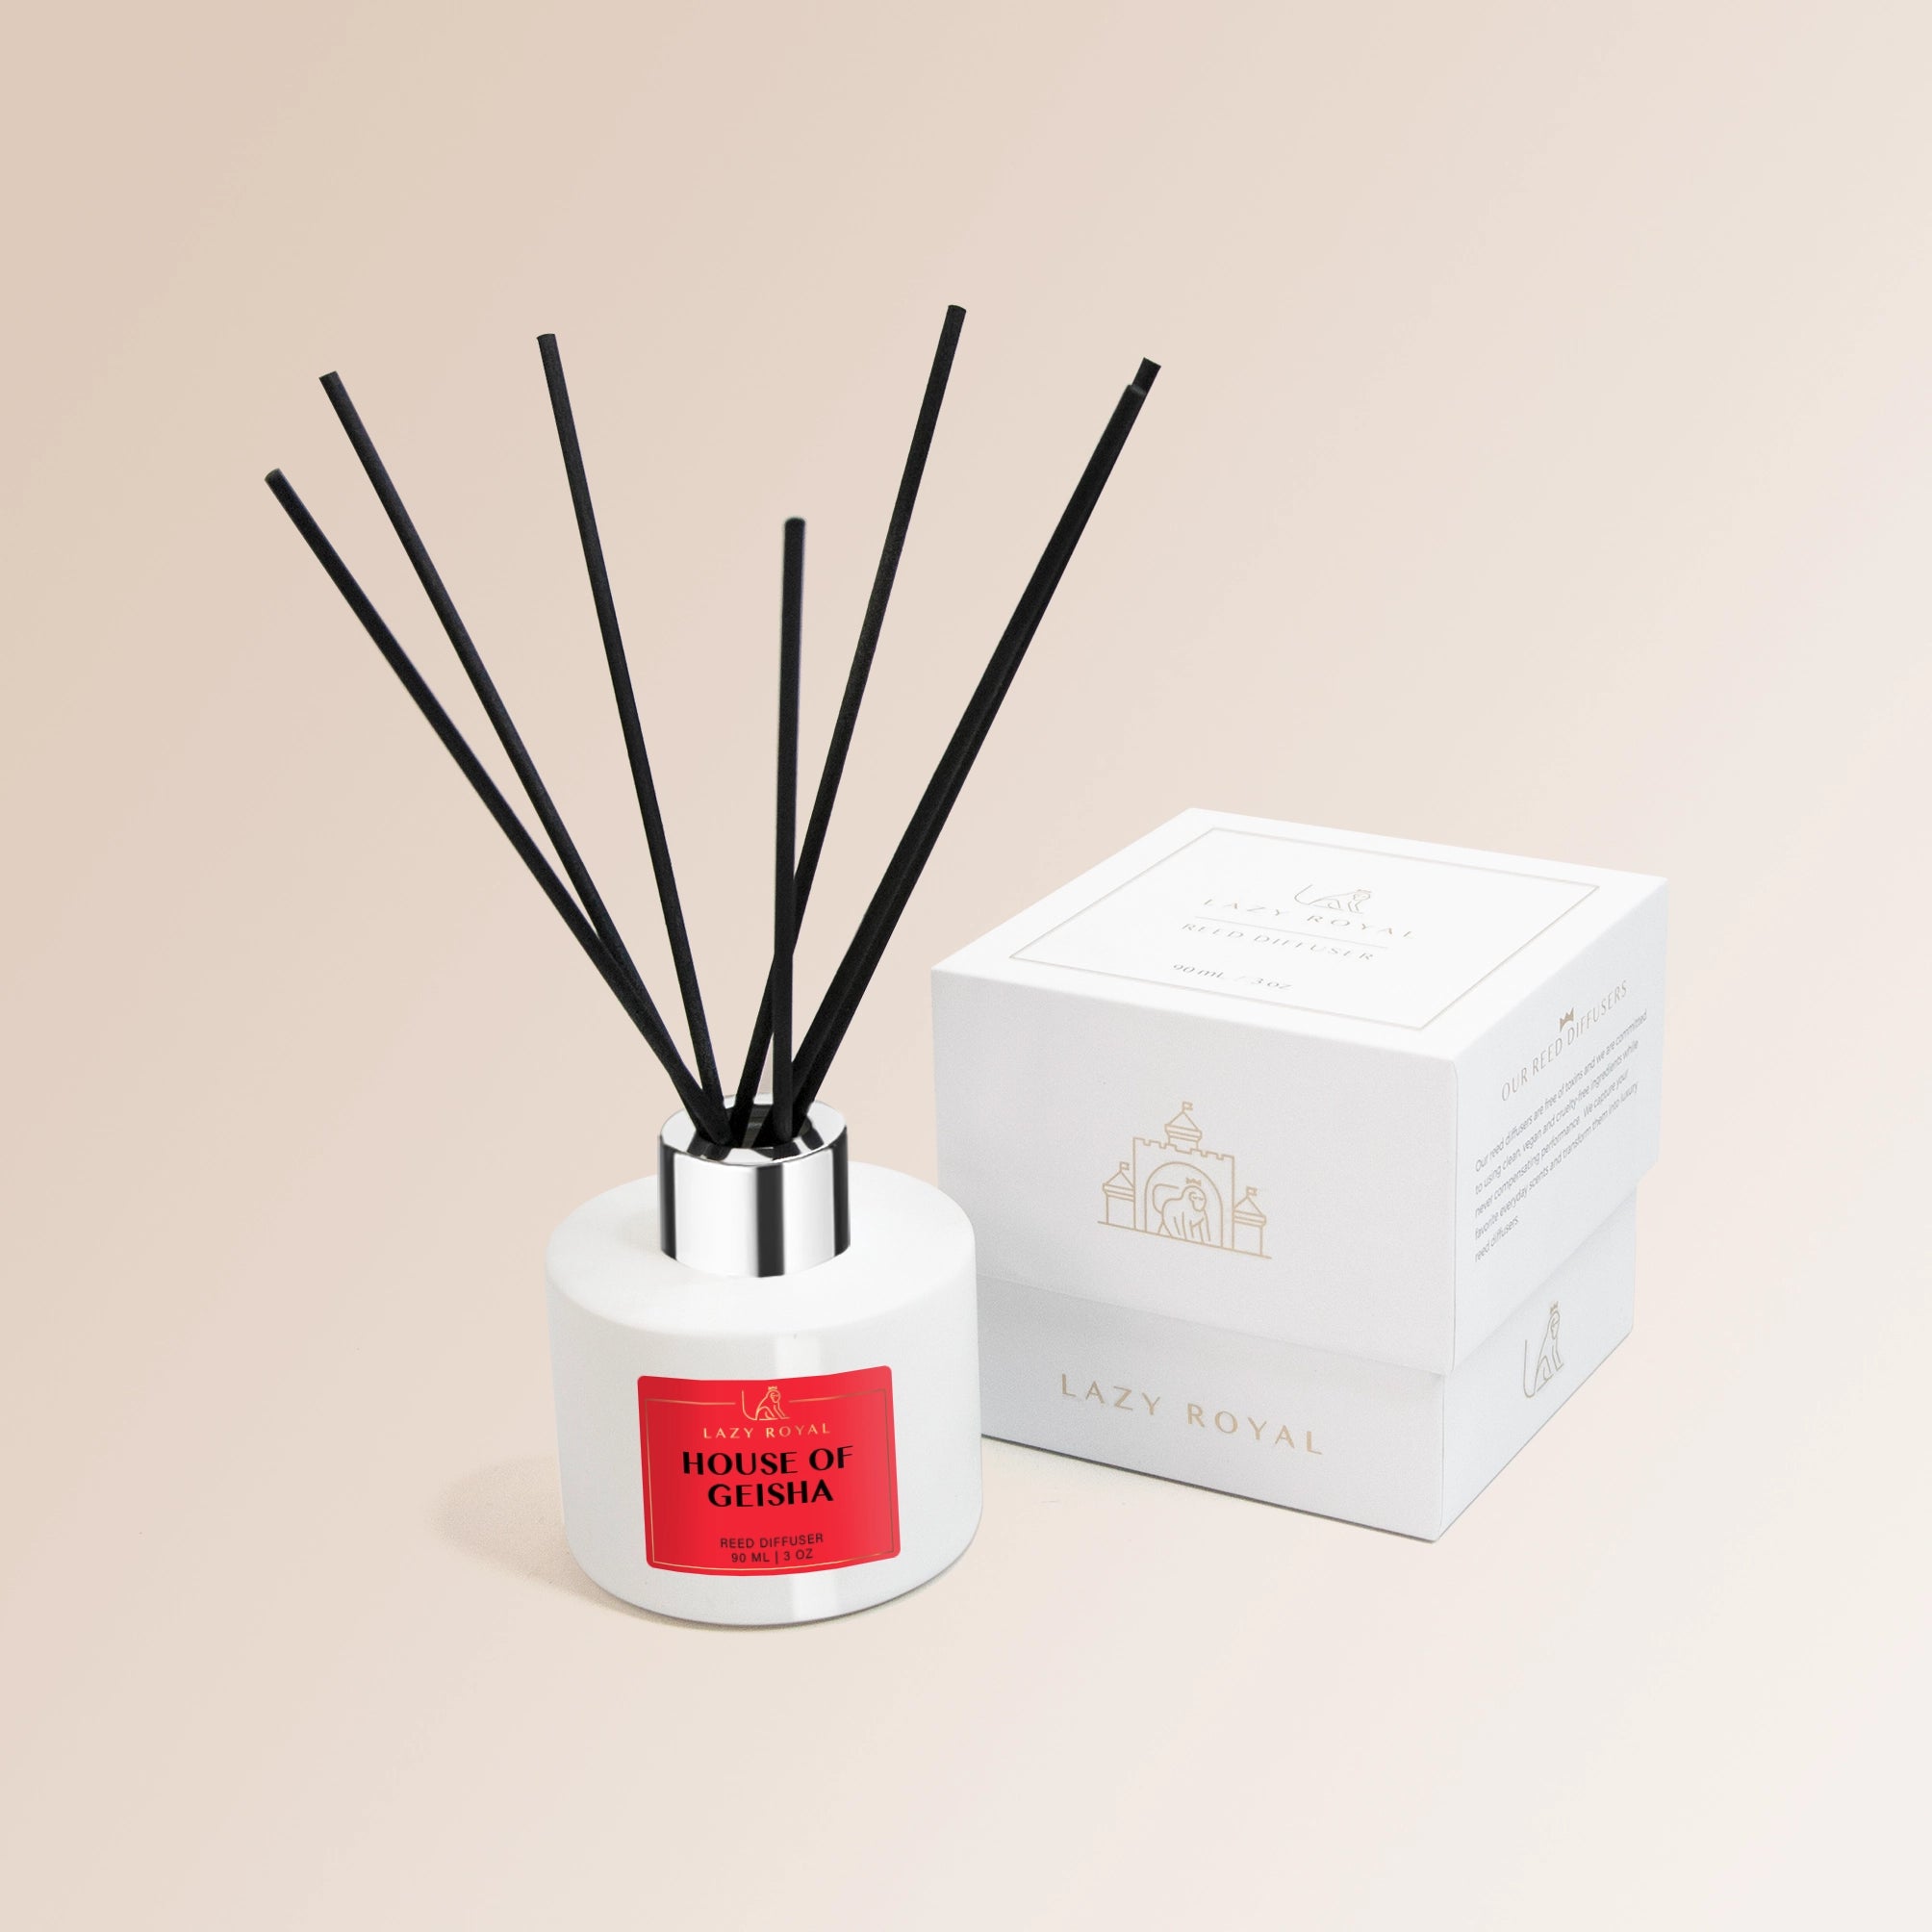 Inspired by Ambre Japonais - House of Geisha Reed Diffuser